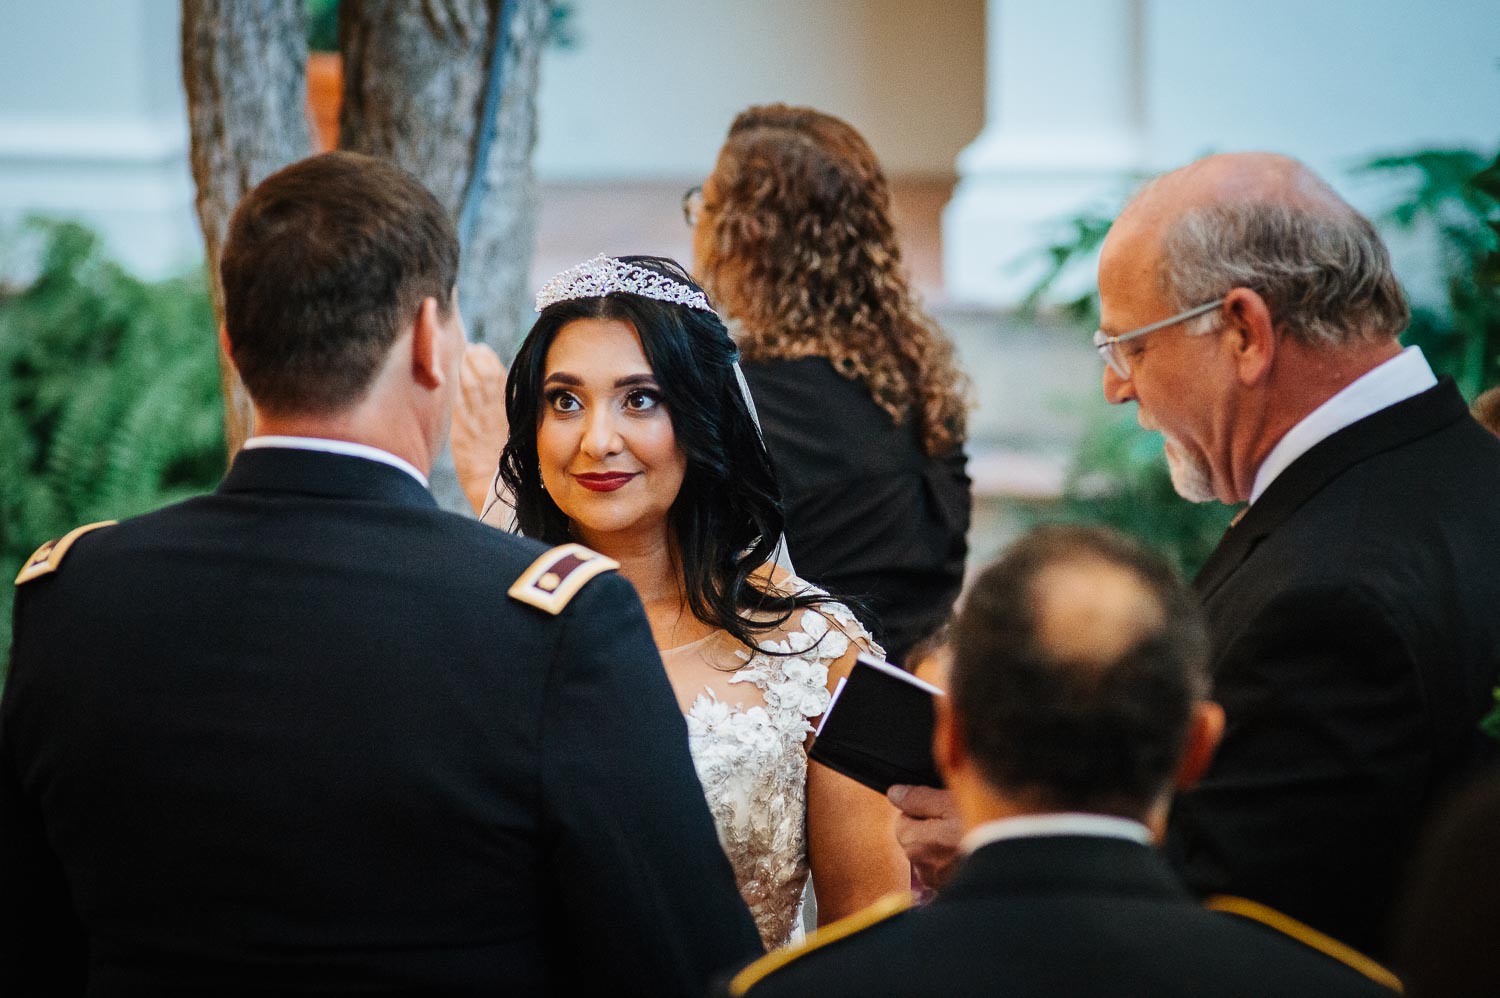 During their vows , the bride makes eyes contact with the groom